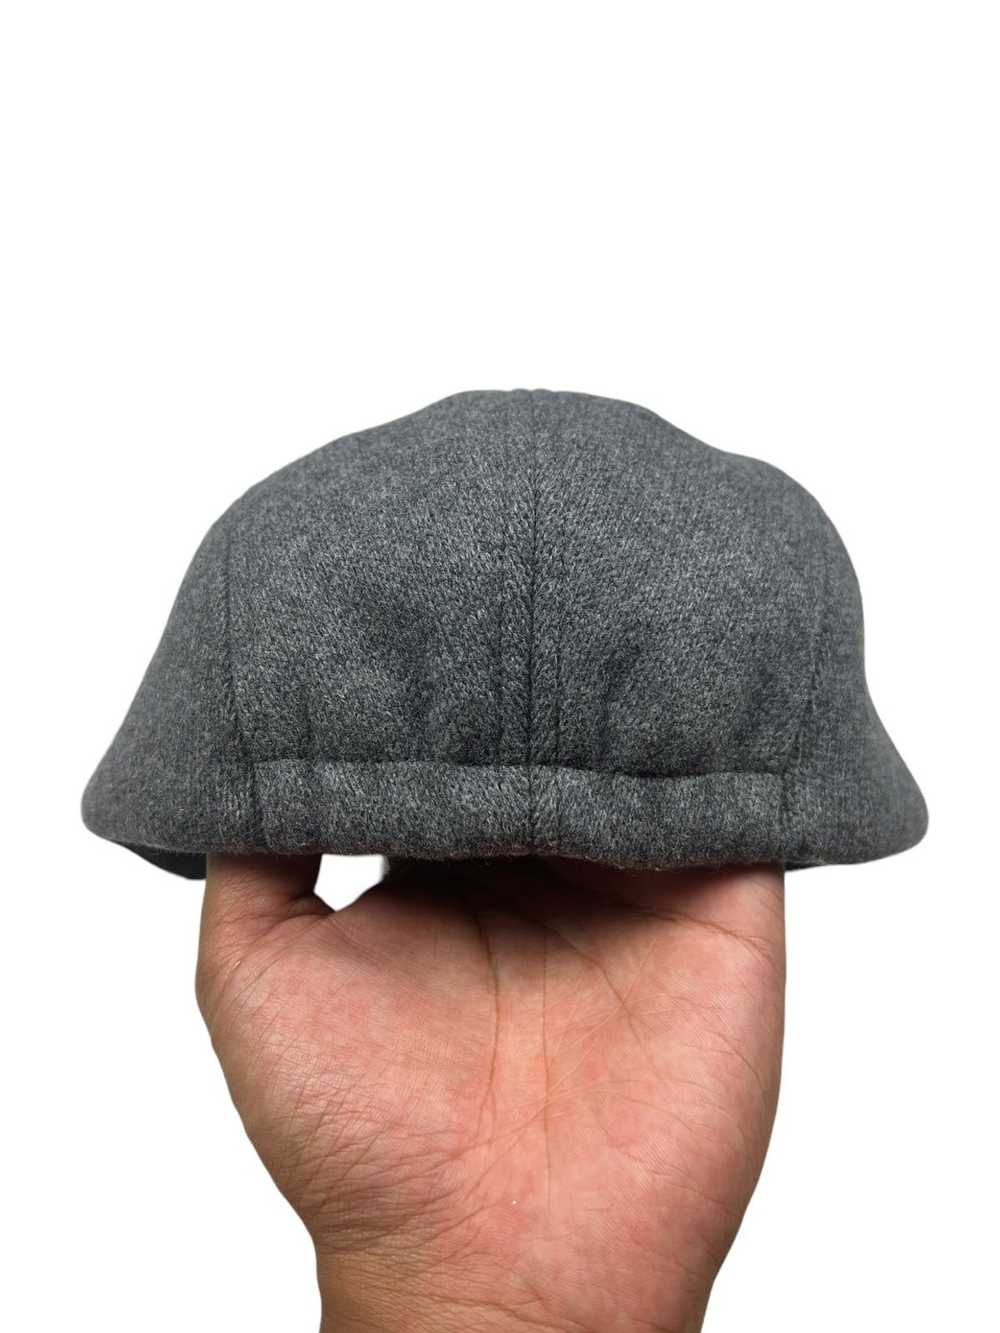 Supreme Supreme Wool Fitted Camp Cap - image 7